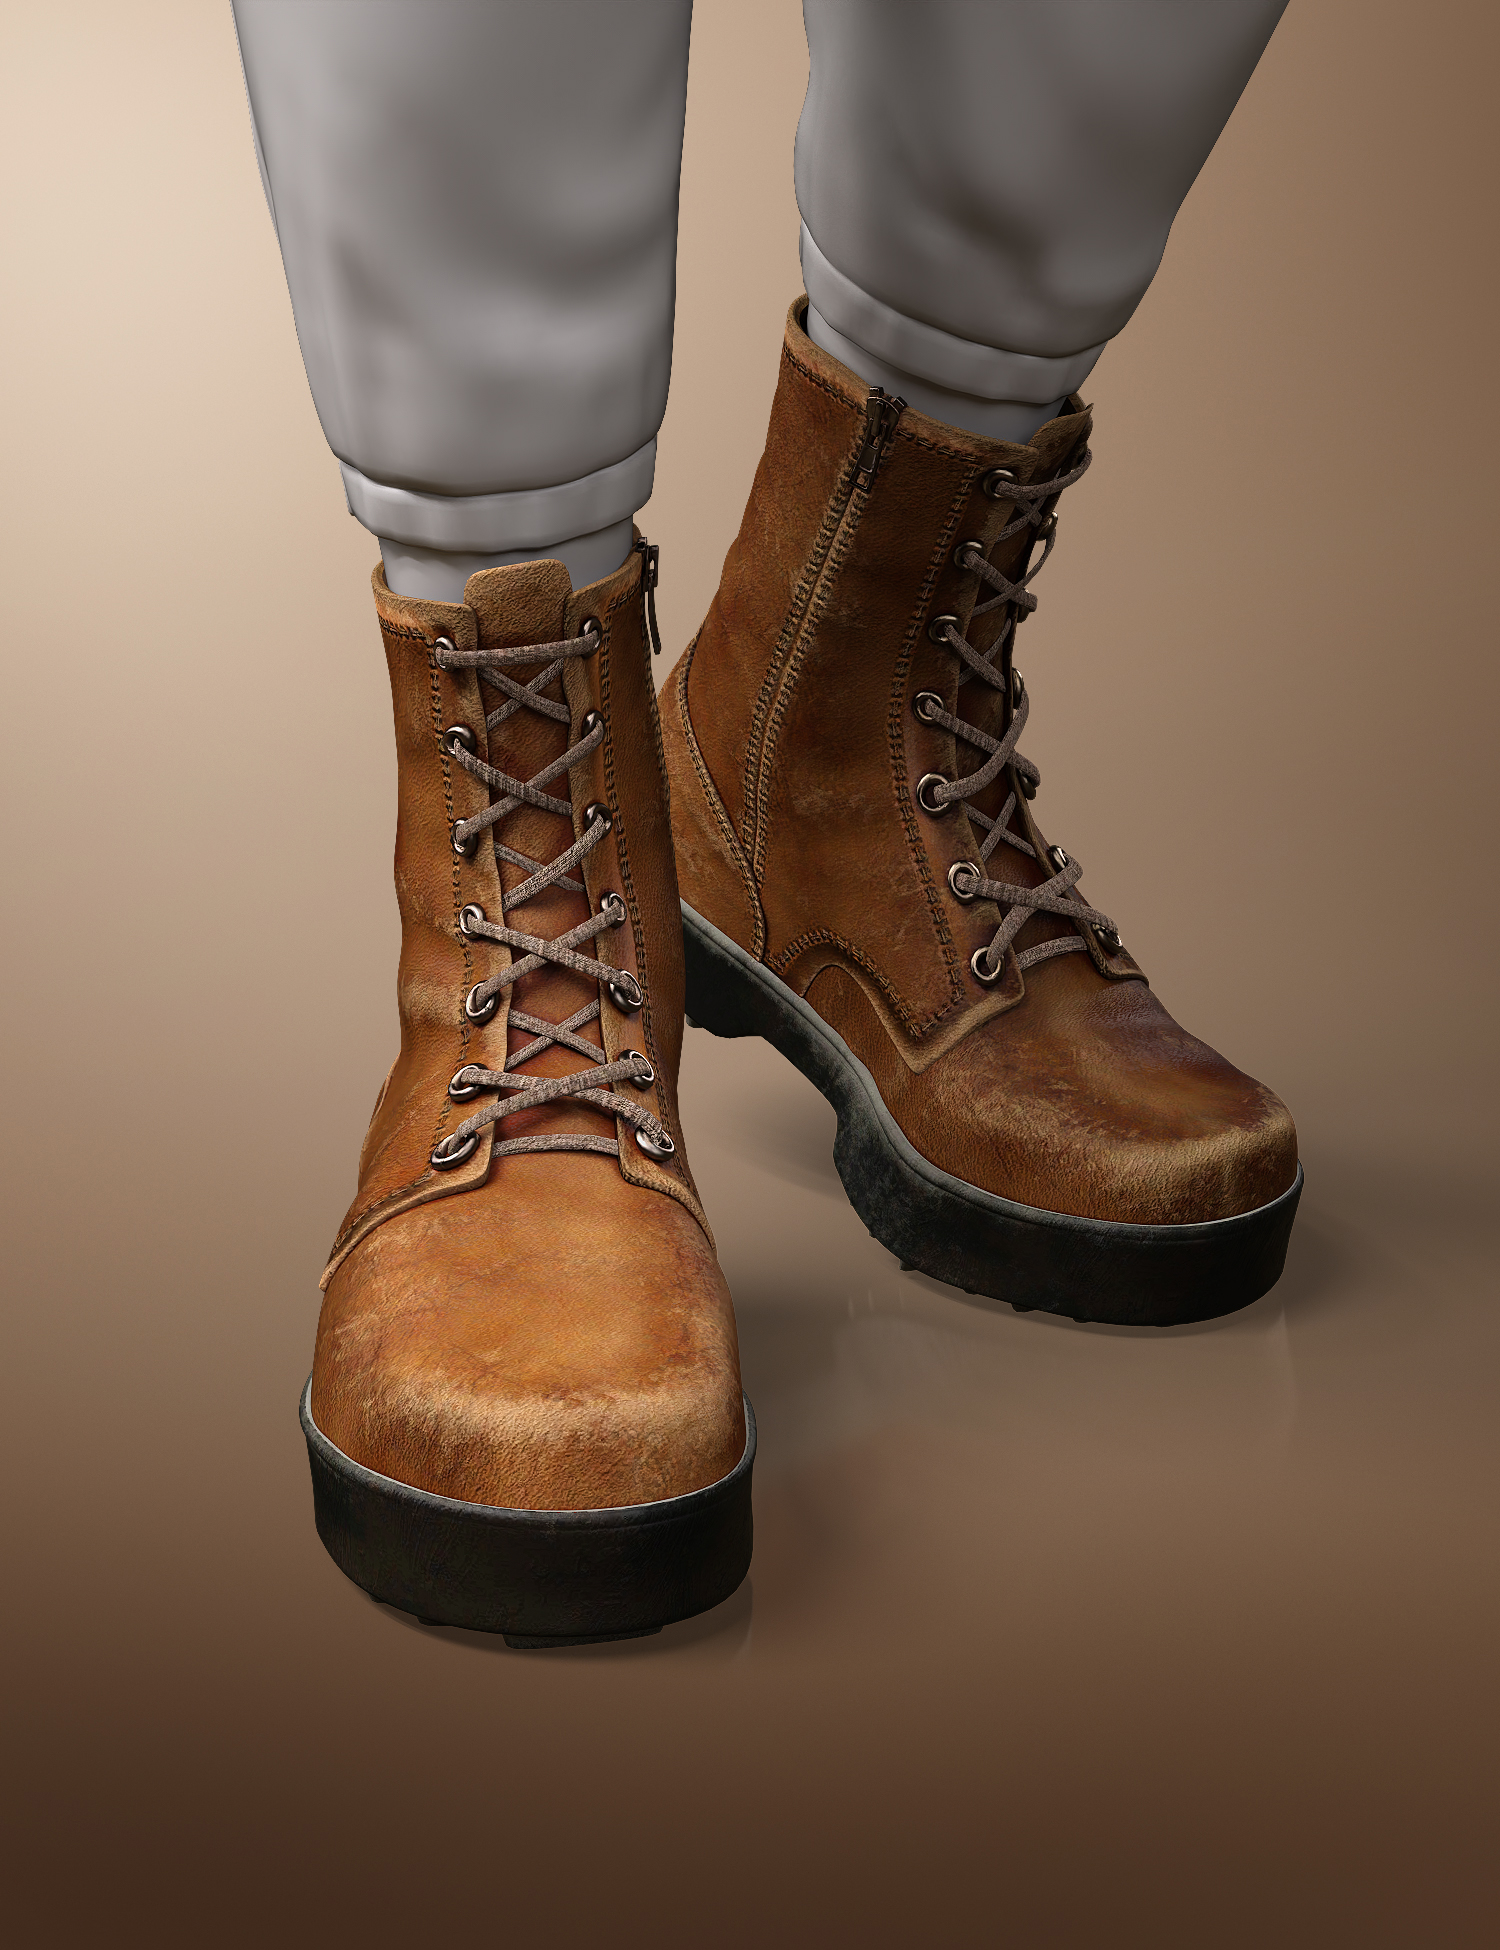 Survival Instinct Boots for Genesis 8 and 8.1 Females by: Barbara Brundon, 3D Models by Daz 3D